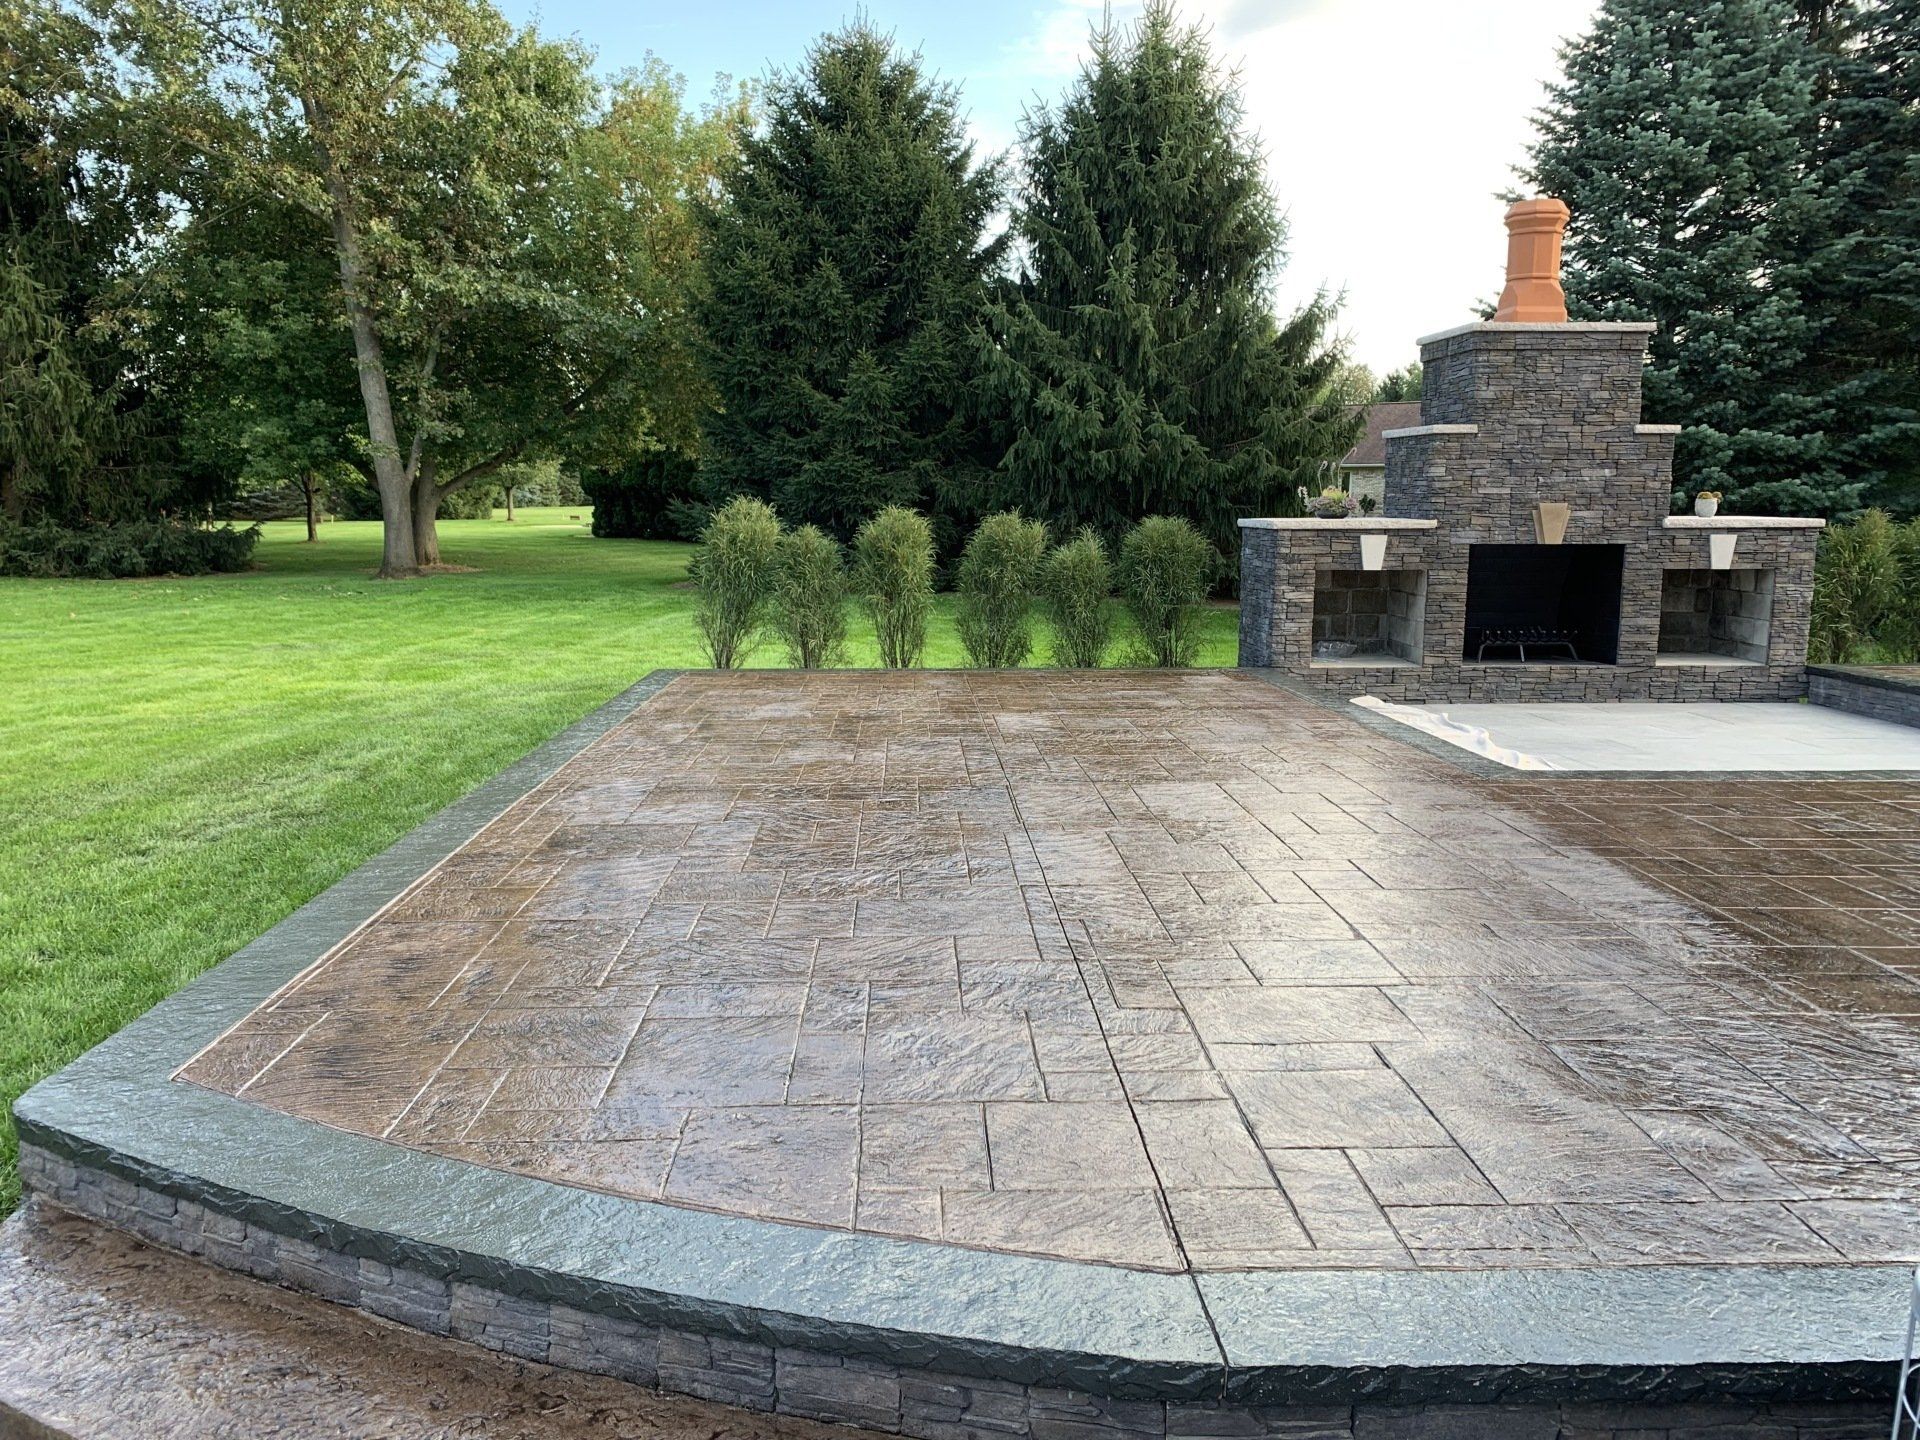 This is a picture of a new stamped concrete patio in front of an outdoor fireplace.